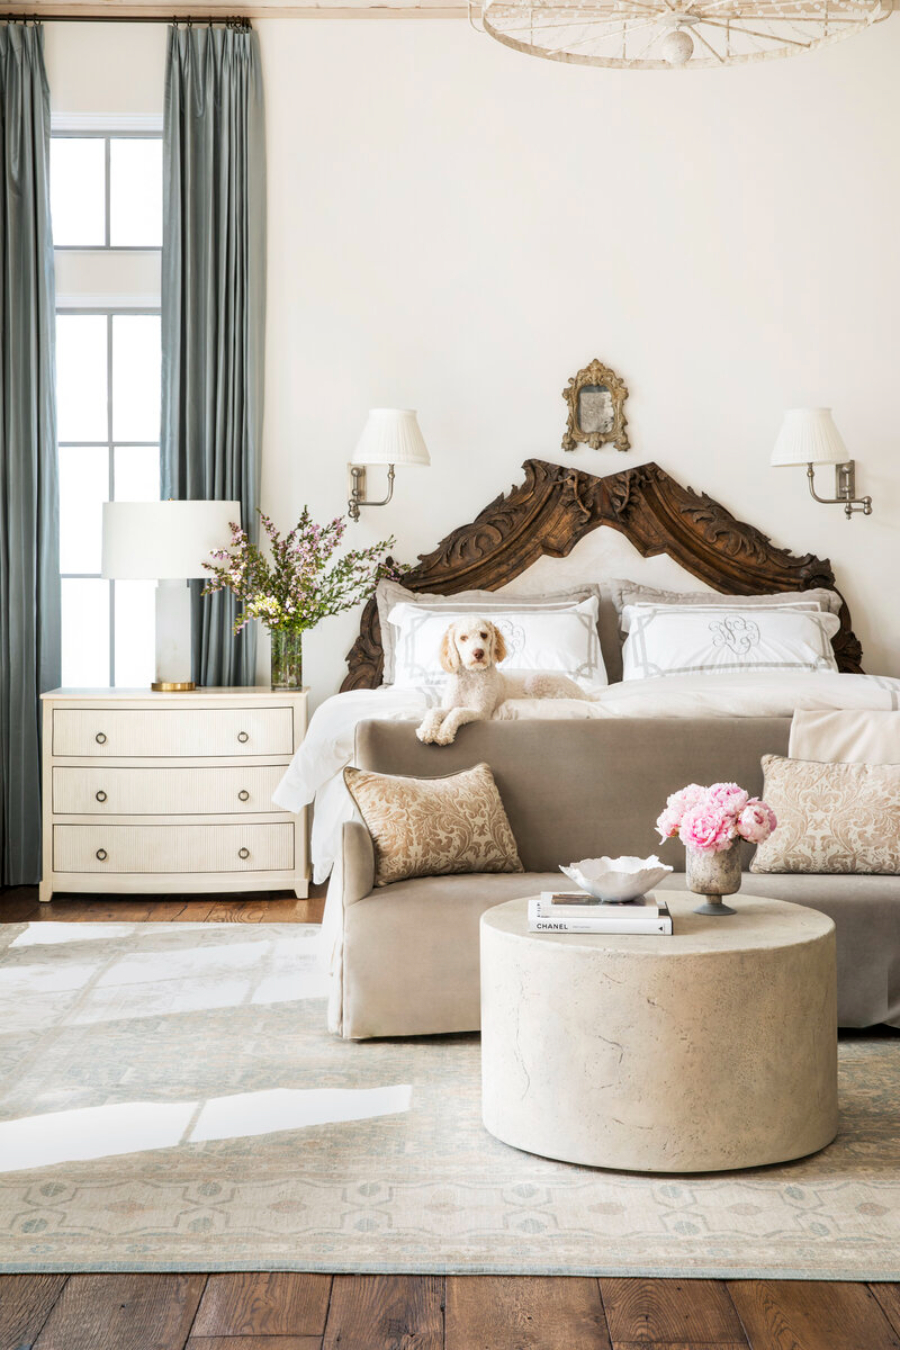 Interior Design Ideas From Marie Flanigan. A comfortable looking bedroom with a dog on the bed. interior design ideas Interior Design Ideas From Marie Flanigan 2420 180611 flanigan 1 cover shot 3 1